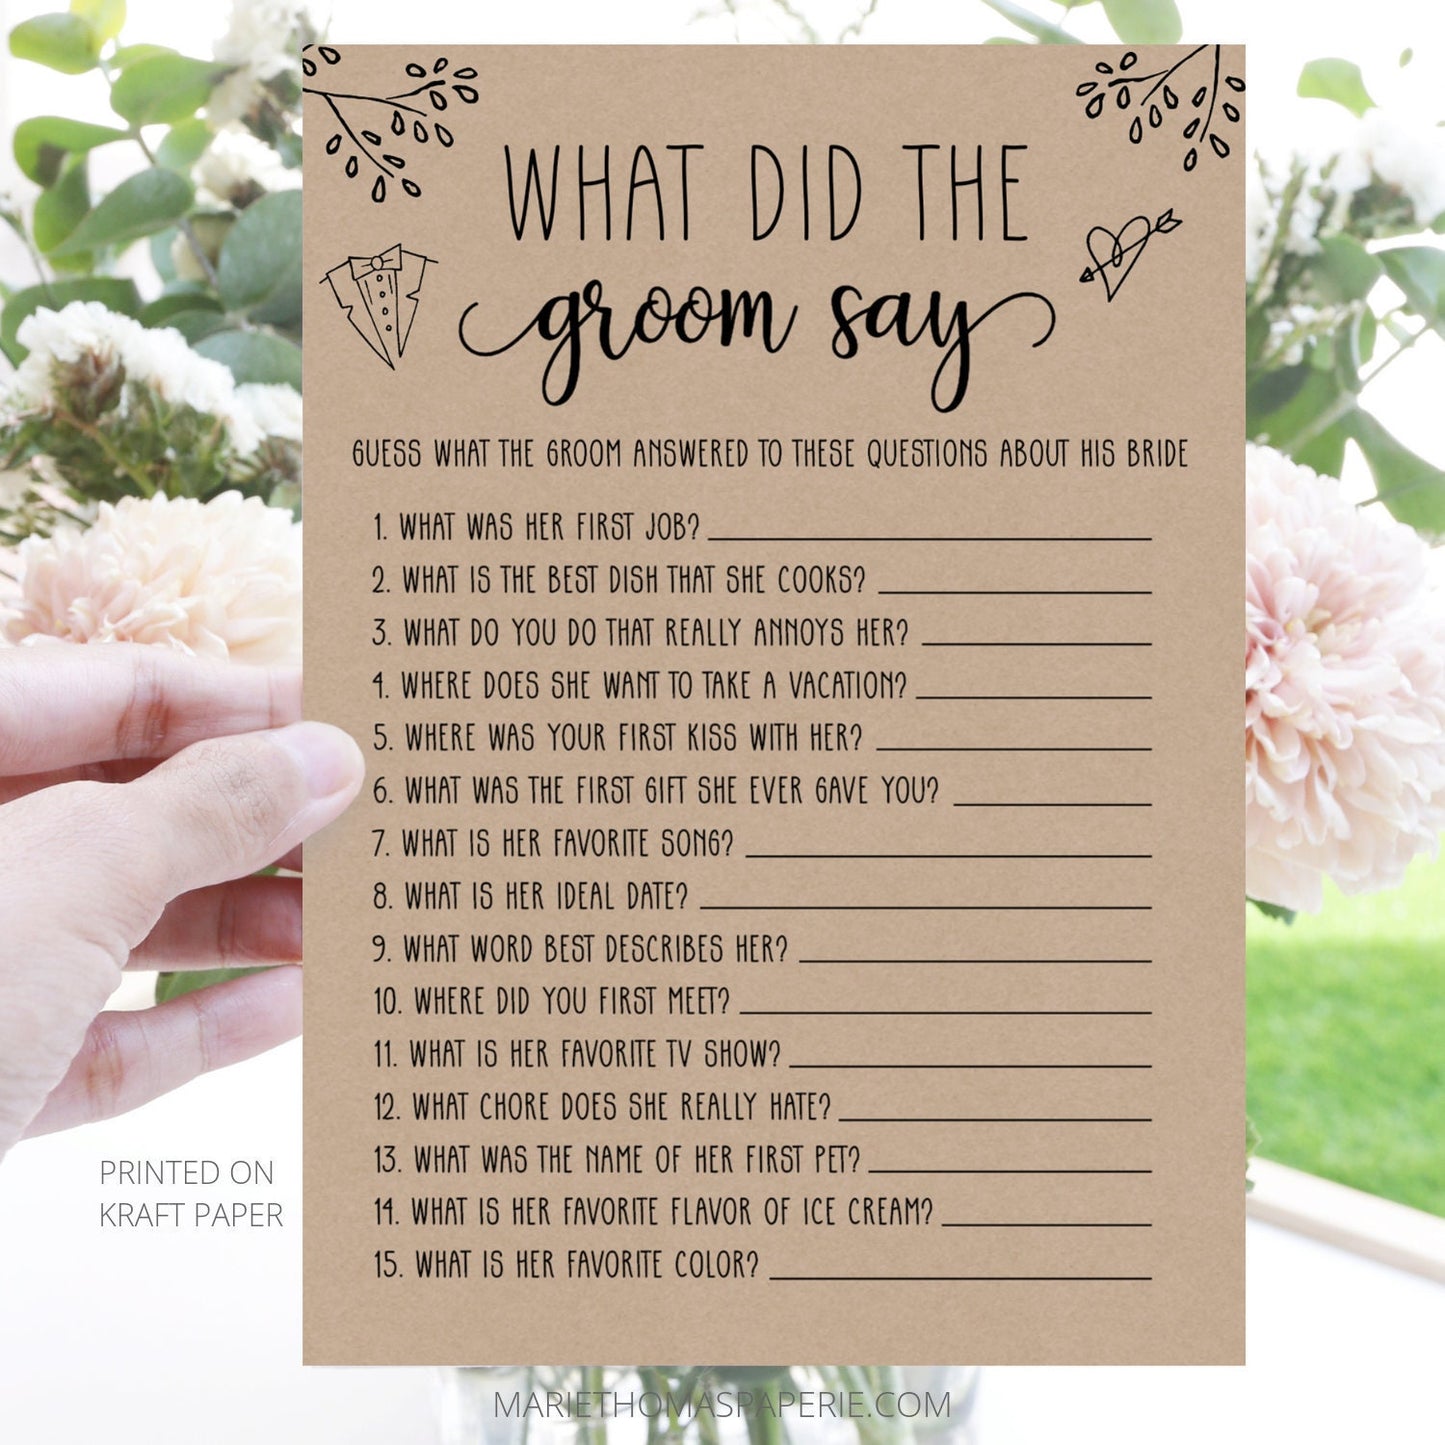 Editable What Did the Groom Say Bridal Shower Games Rustic Wedding Games + Virtual Template